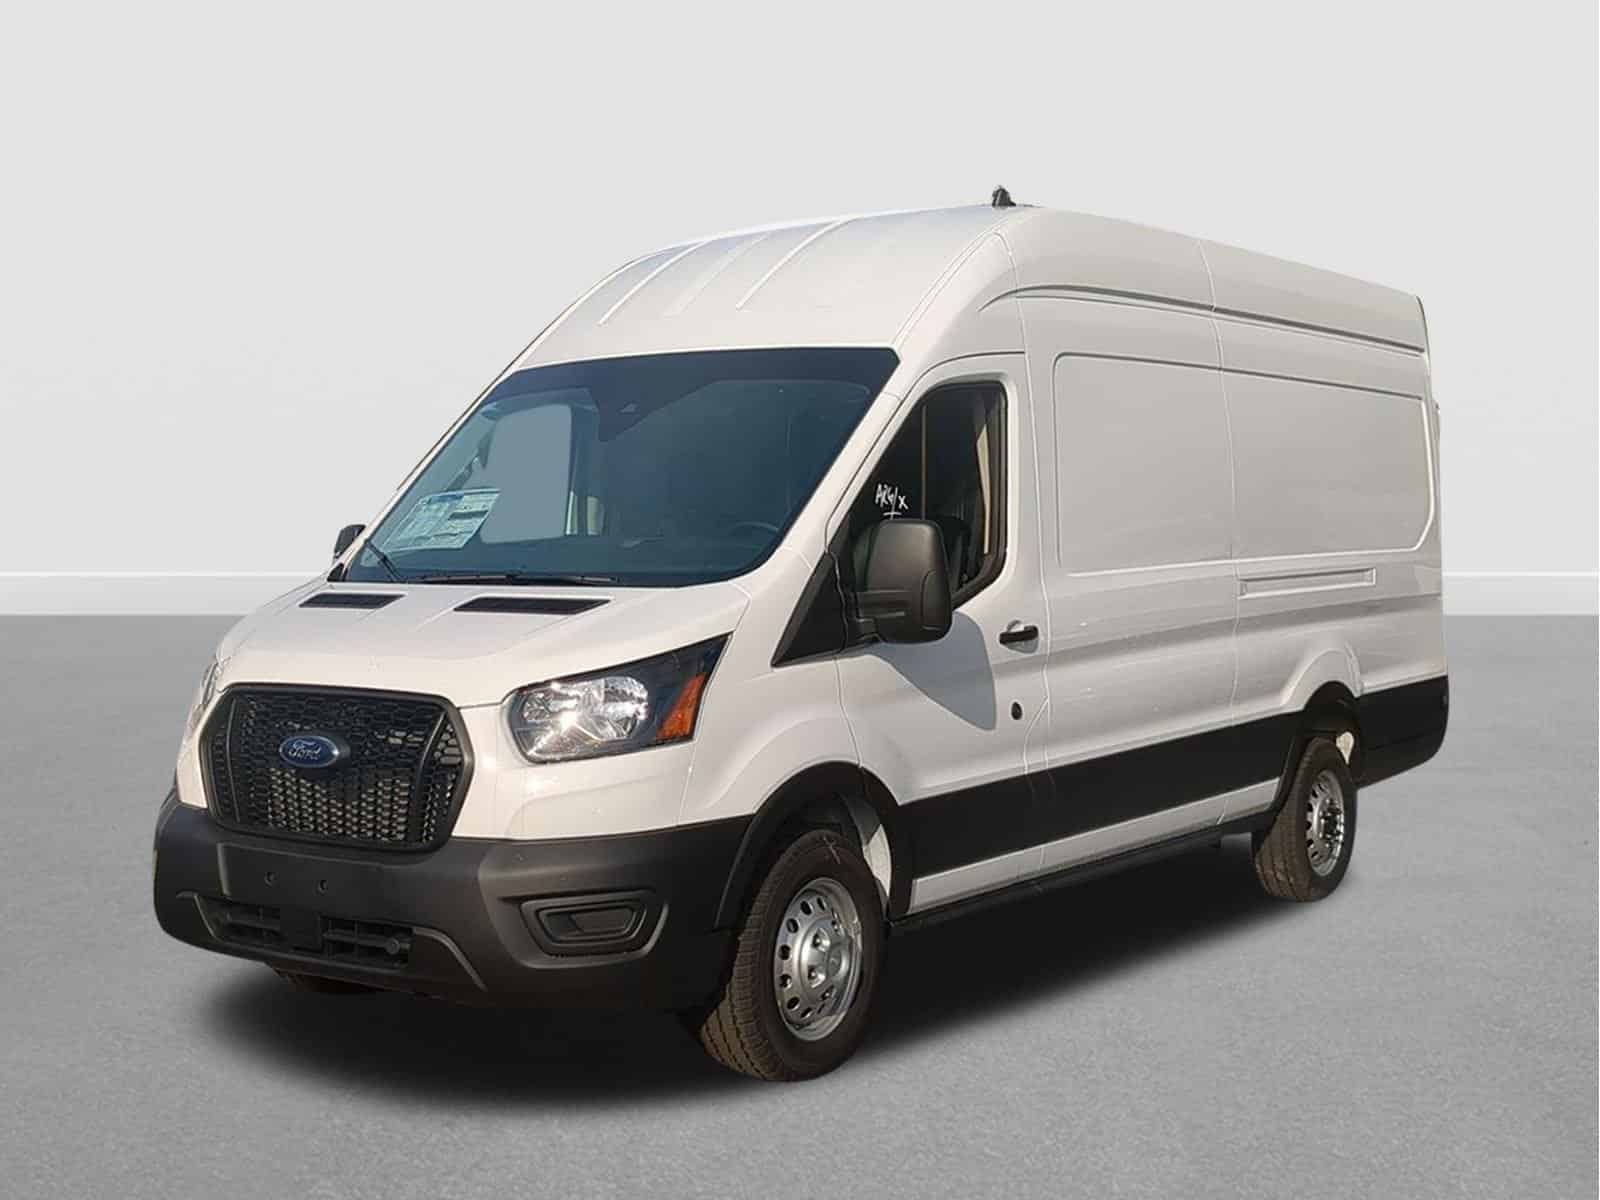 A white Ford Transit cargo van is parked on a plain surface with a grey background.